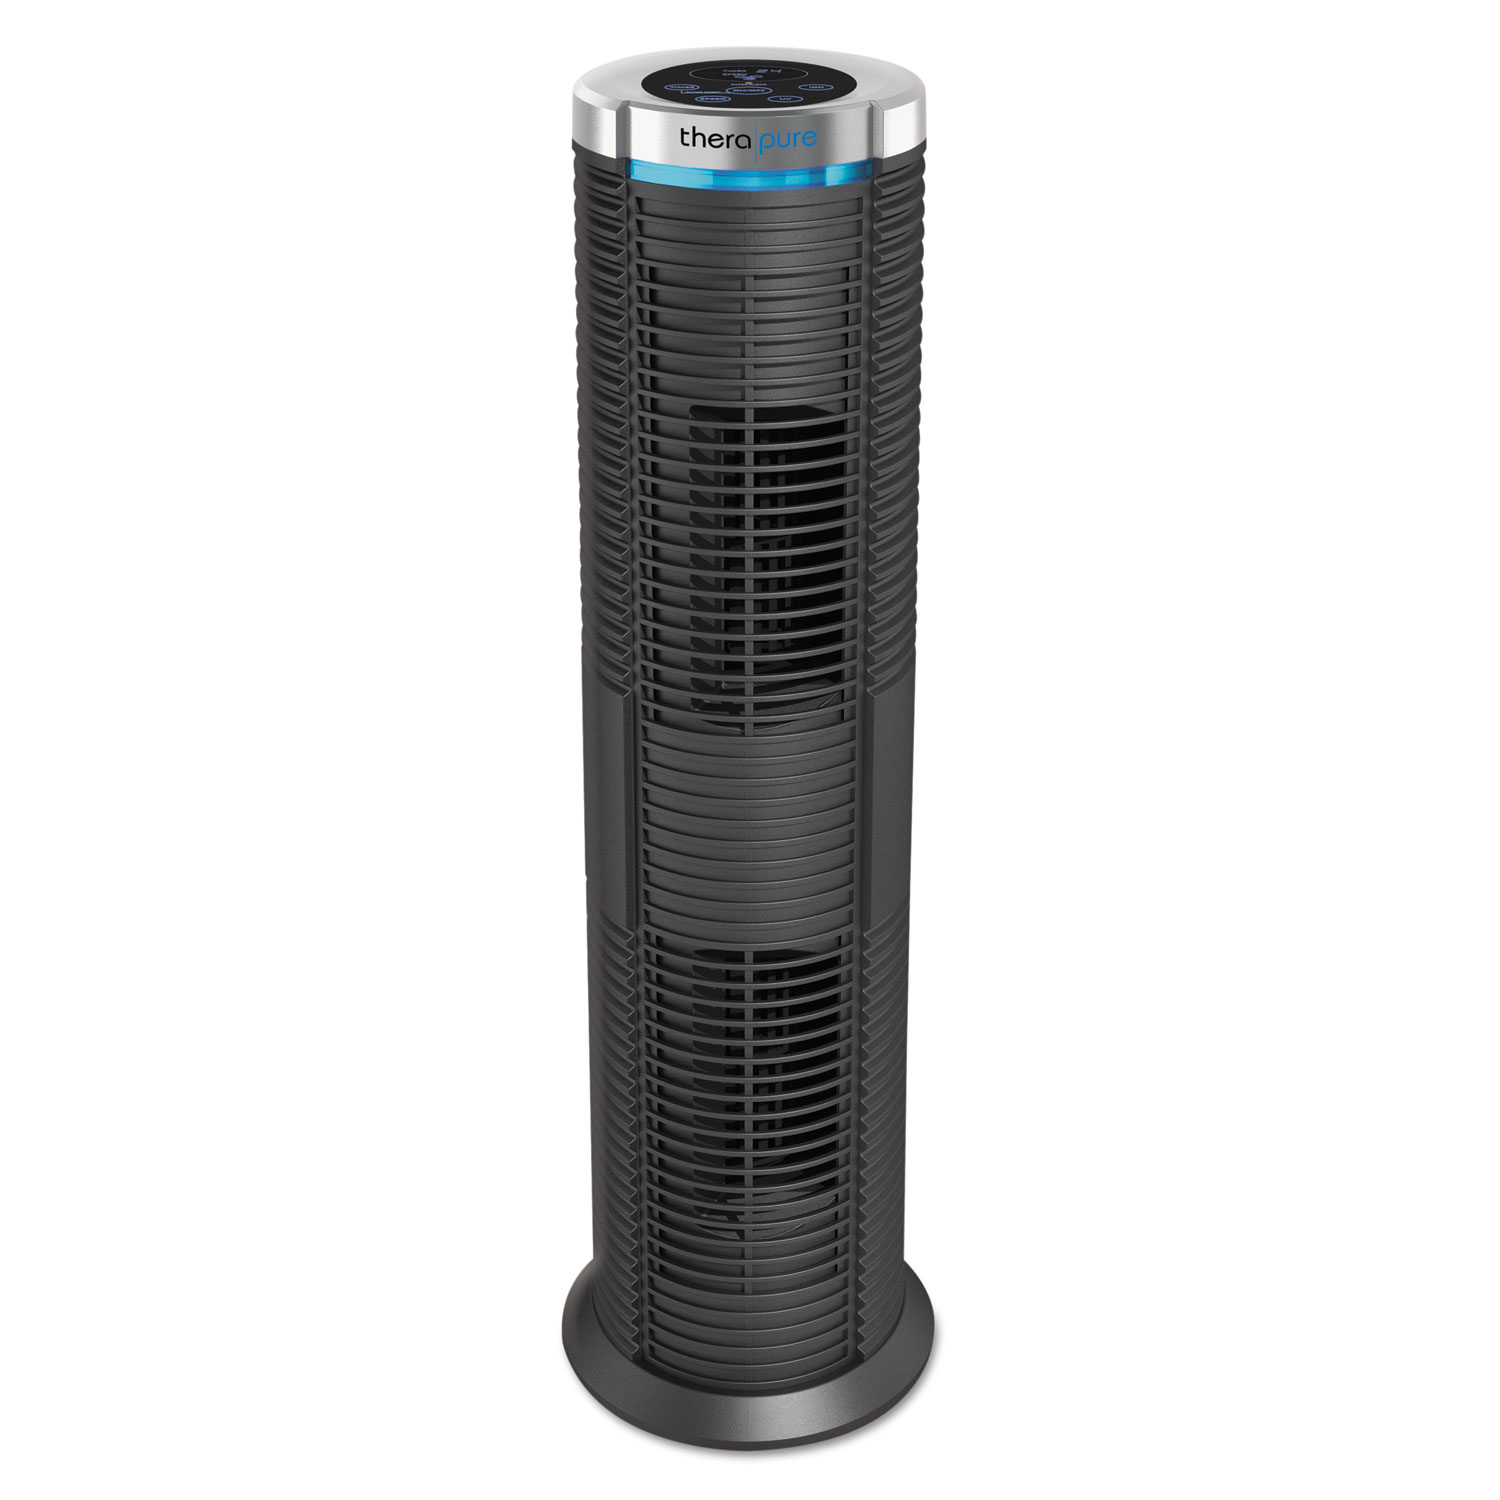  Therapure 90TP240TW01W TPP240M HEPA-Type Air Purifier, 221 sq ft Room Capacity, Black (ION90TP240TW01W) 